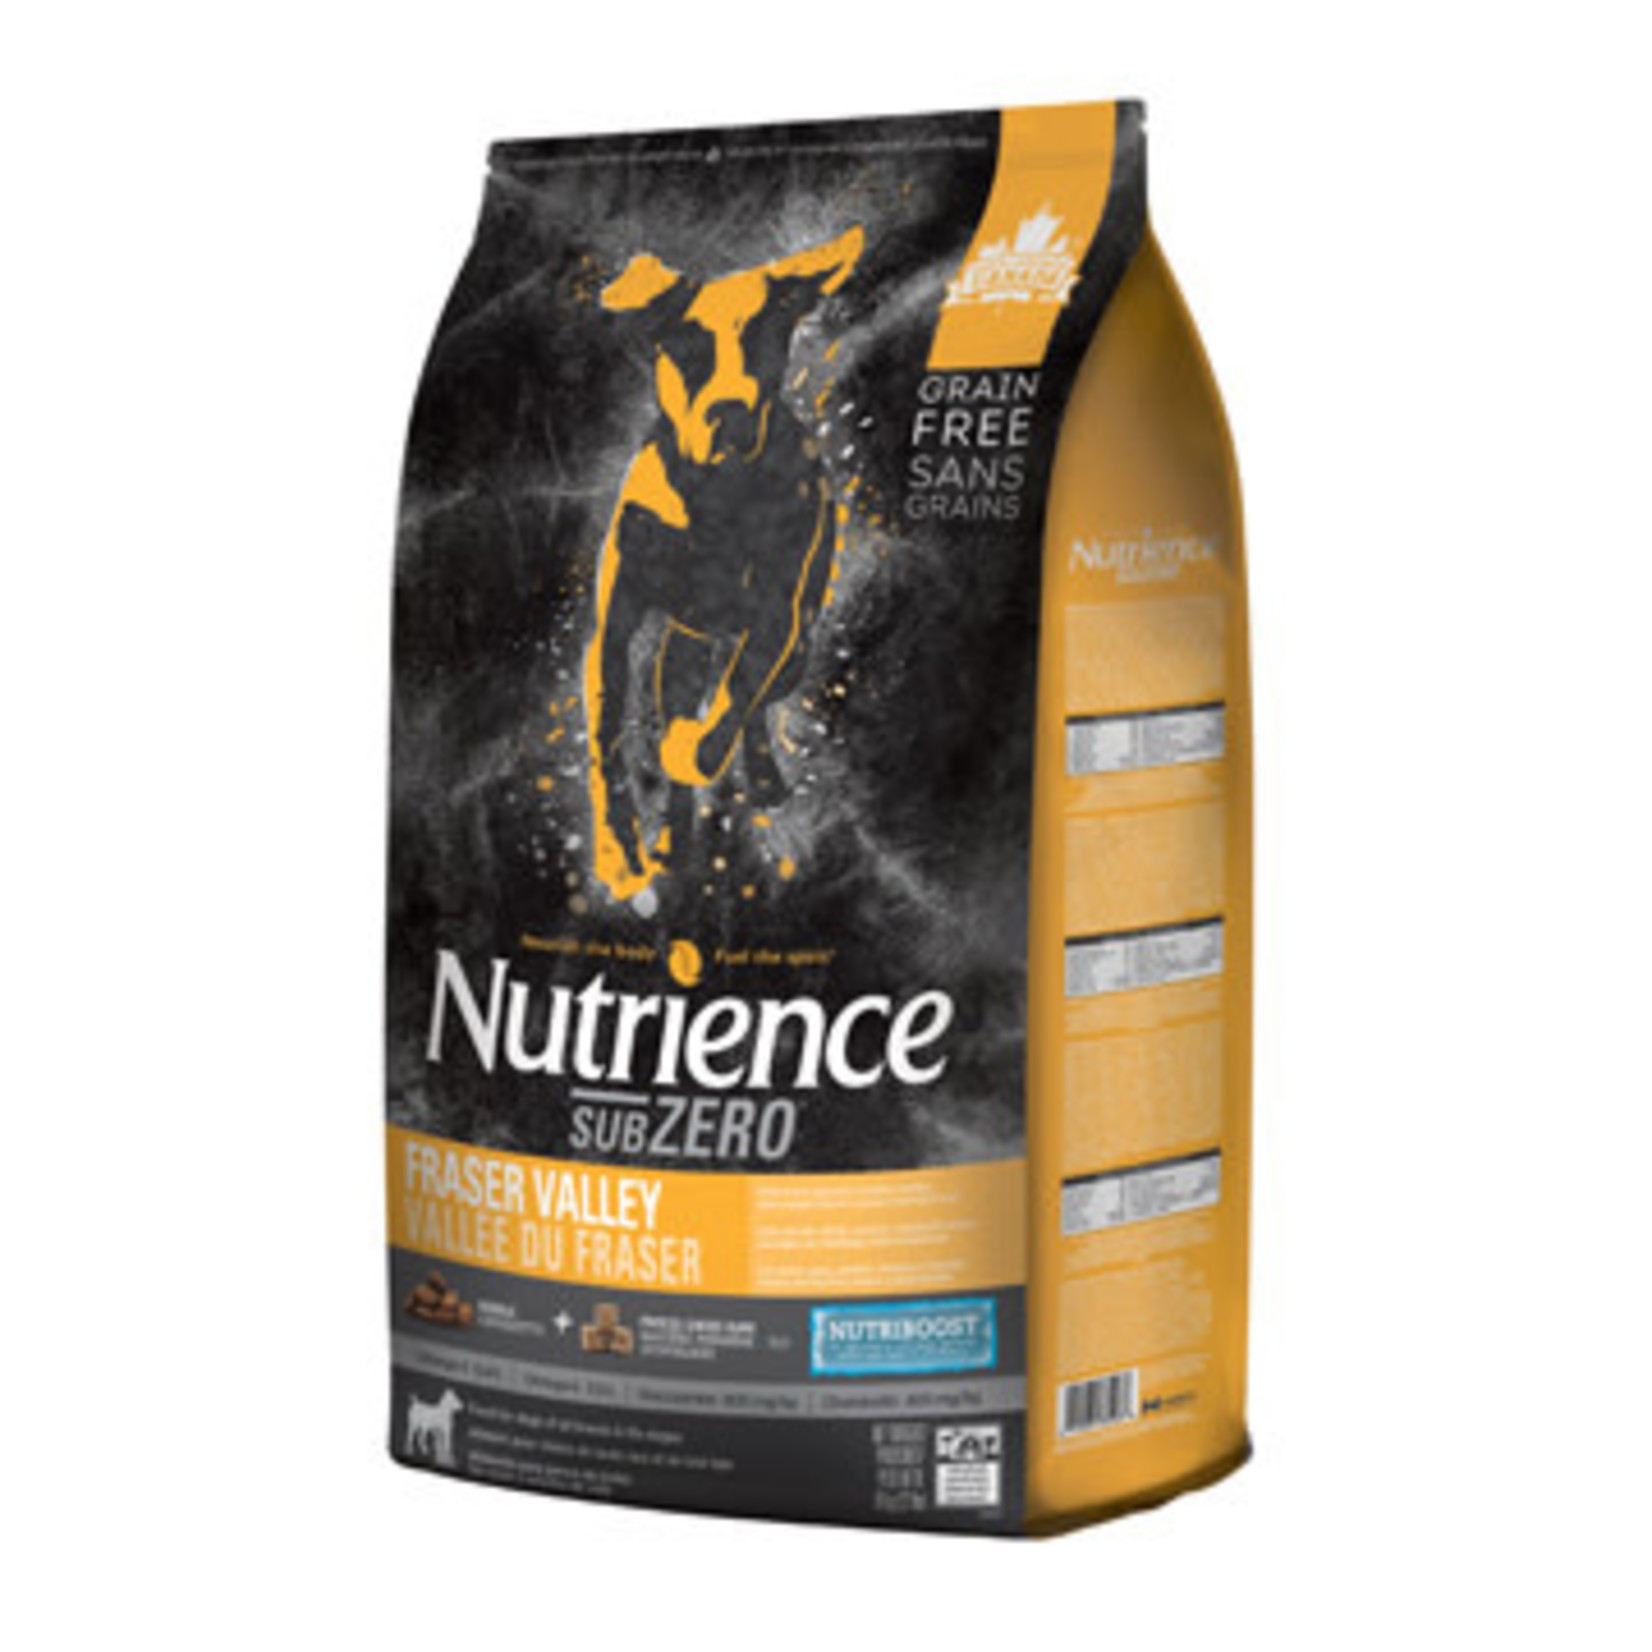 NUTRIENCE Nutrience Grain Free Subzero for Dogs - Fraser Valley - 10 kg (22 lbs)